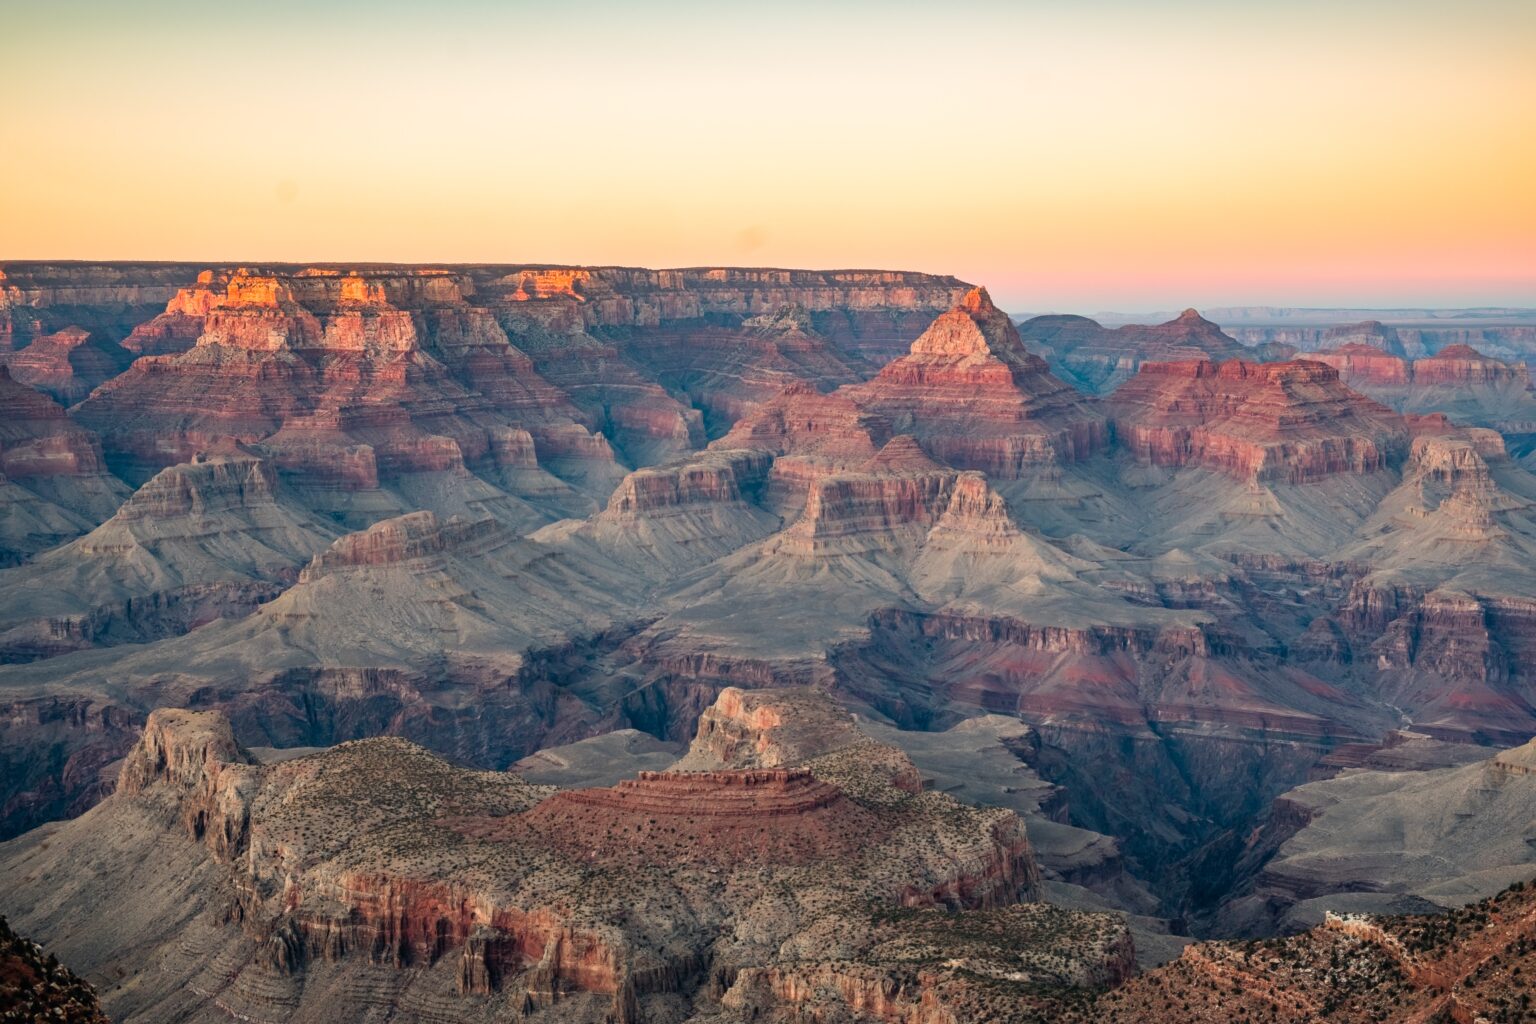 Touring the American Southwest with Caravan Tours